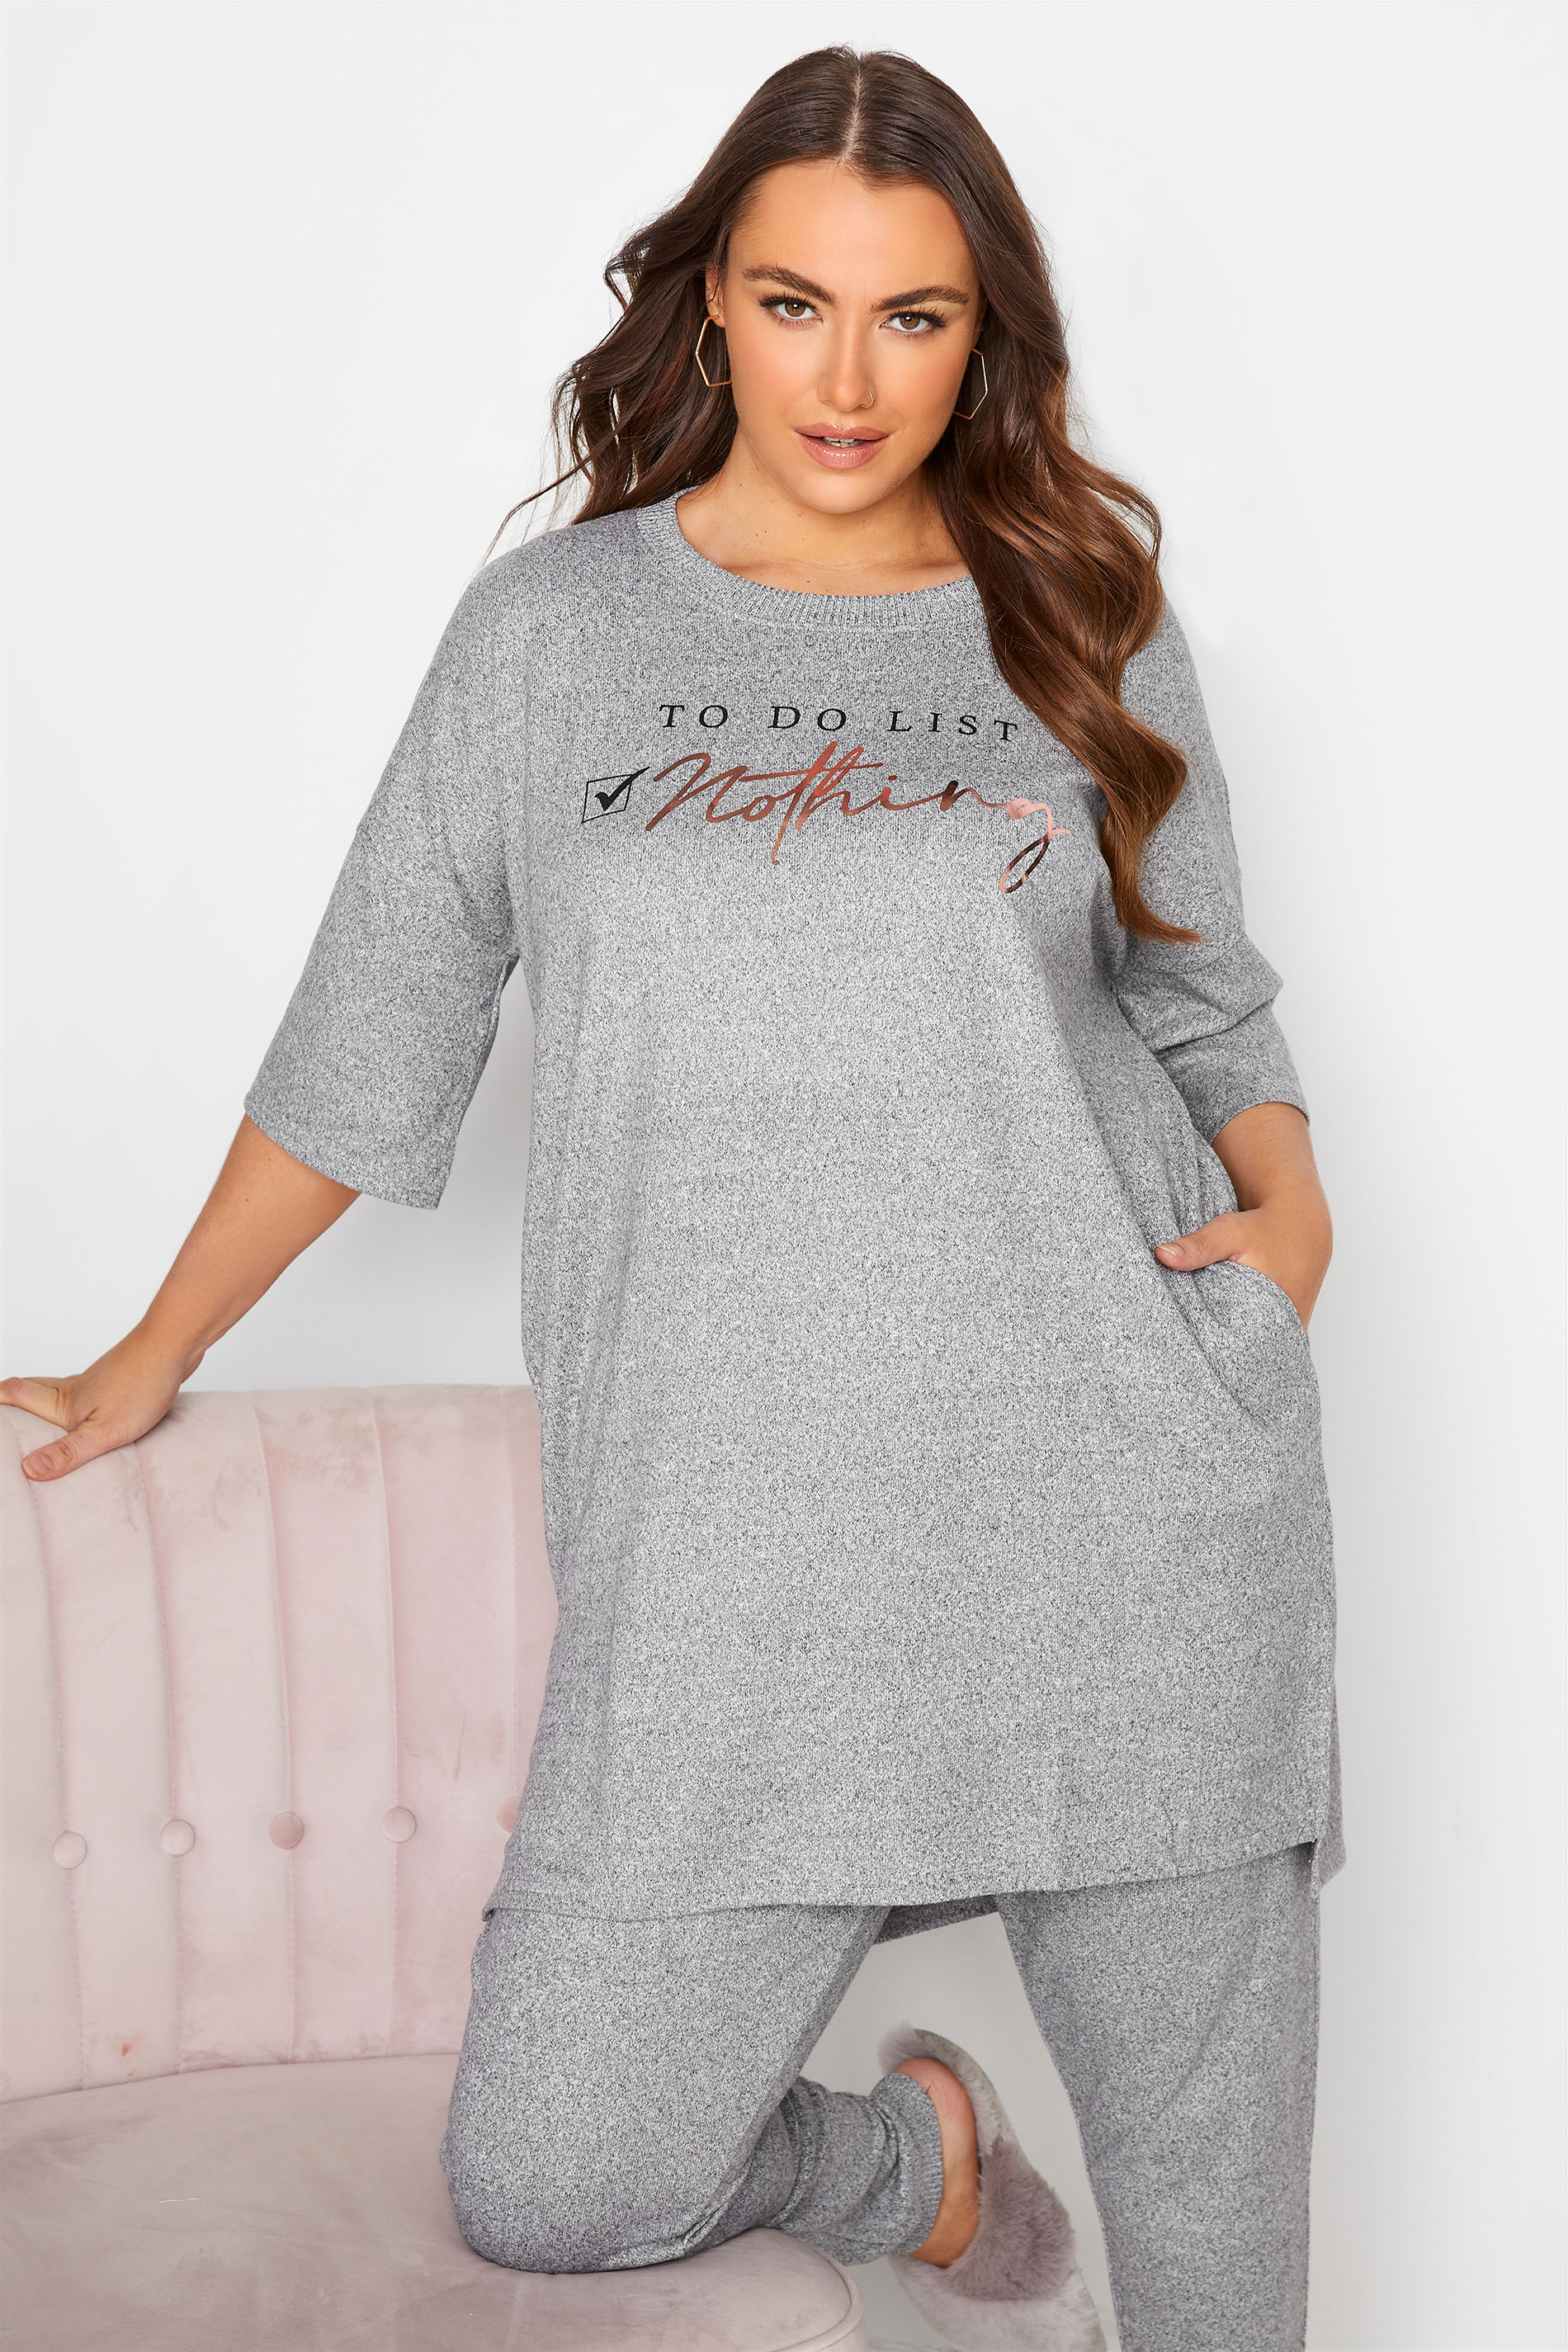 Grey 'To Do List: Nothing' Longline Lounge Top_A.jpg